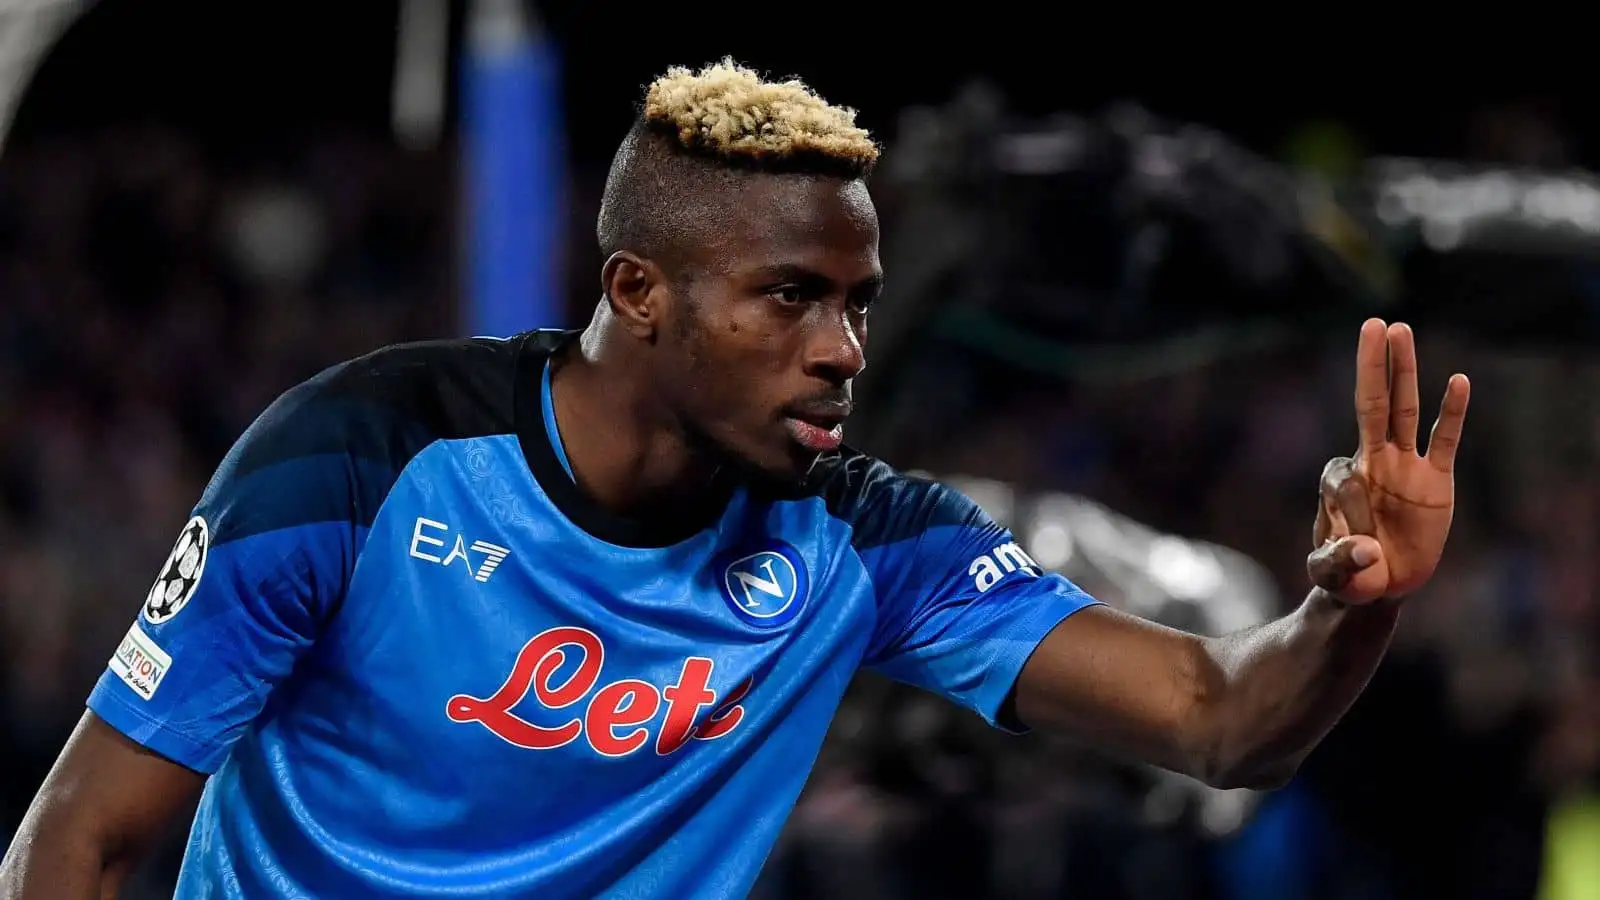 Victor Osimhen of SSC Napoli celebrates after scoring the goal of 1-0 during the Champions League football match between SSC Napoli and Eintracht Frankfurt at Diego Armando Maradona stadium in Napoli